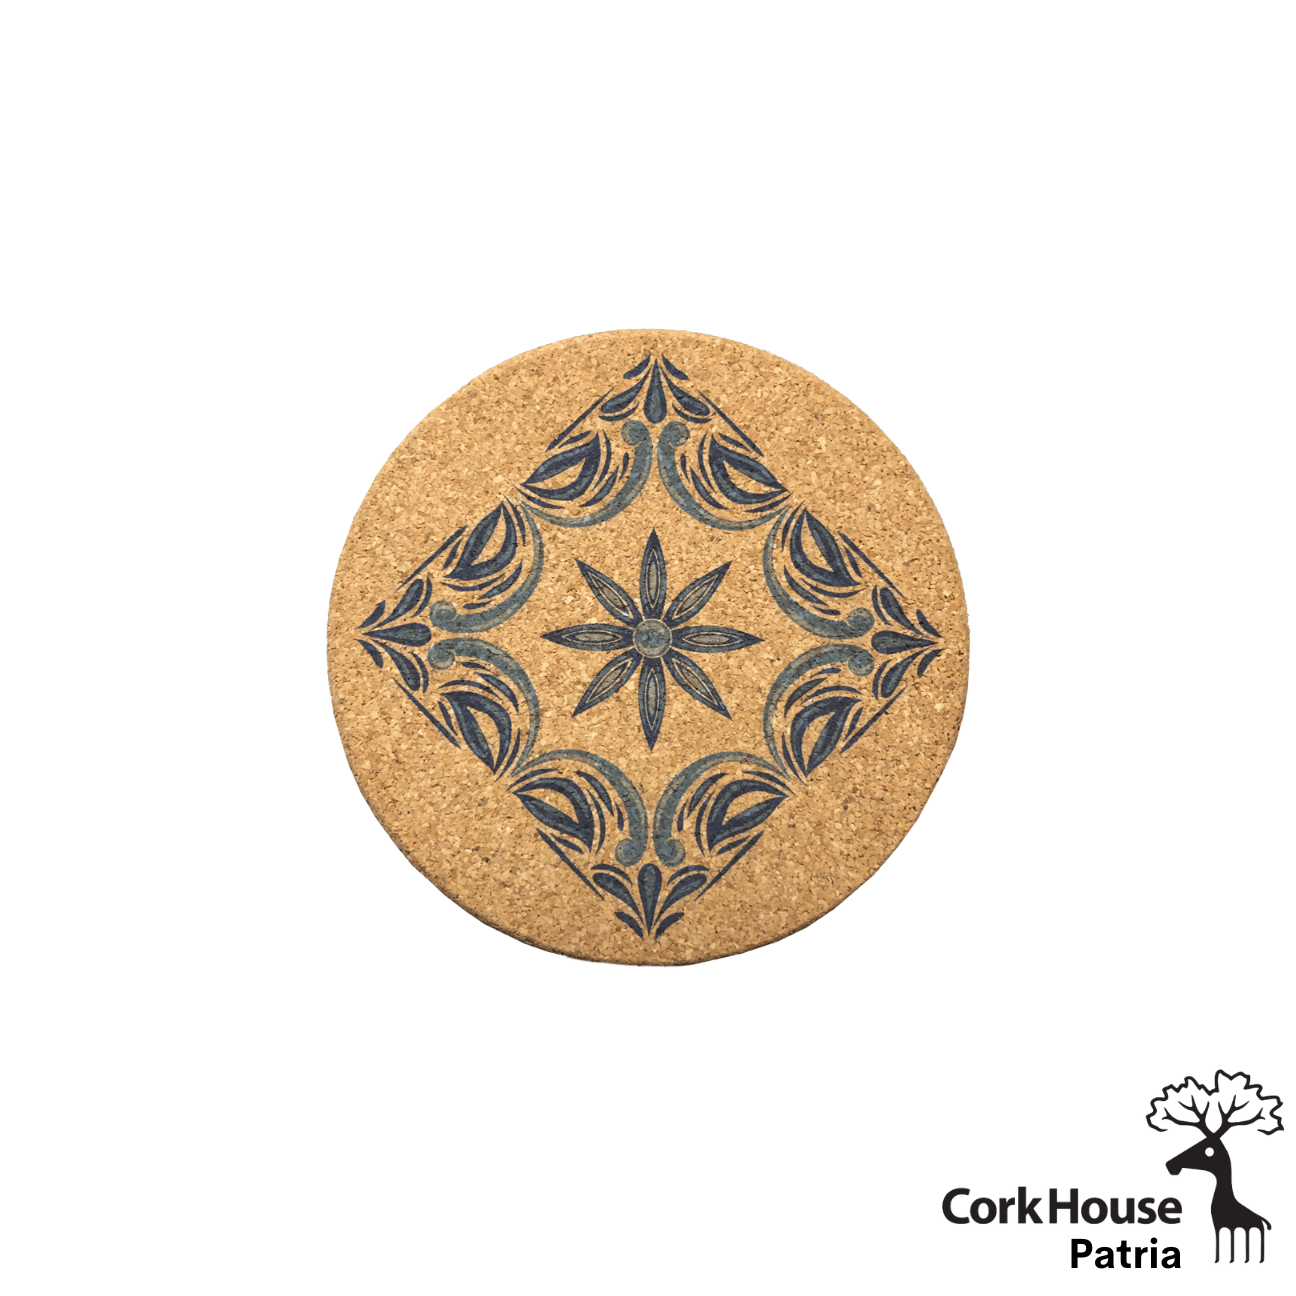 The patria coaster features a simple design in monochromatic blue with swirling lines surrounding an eight point flower on a round cork coaster